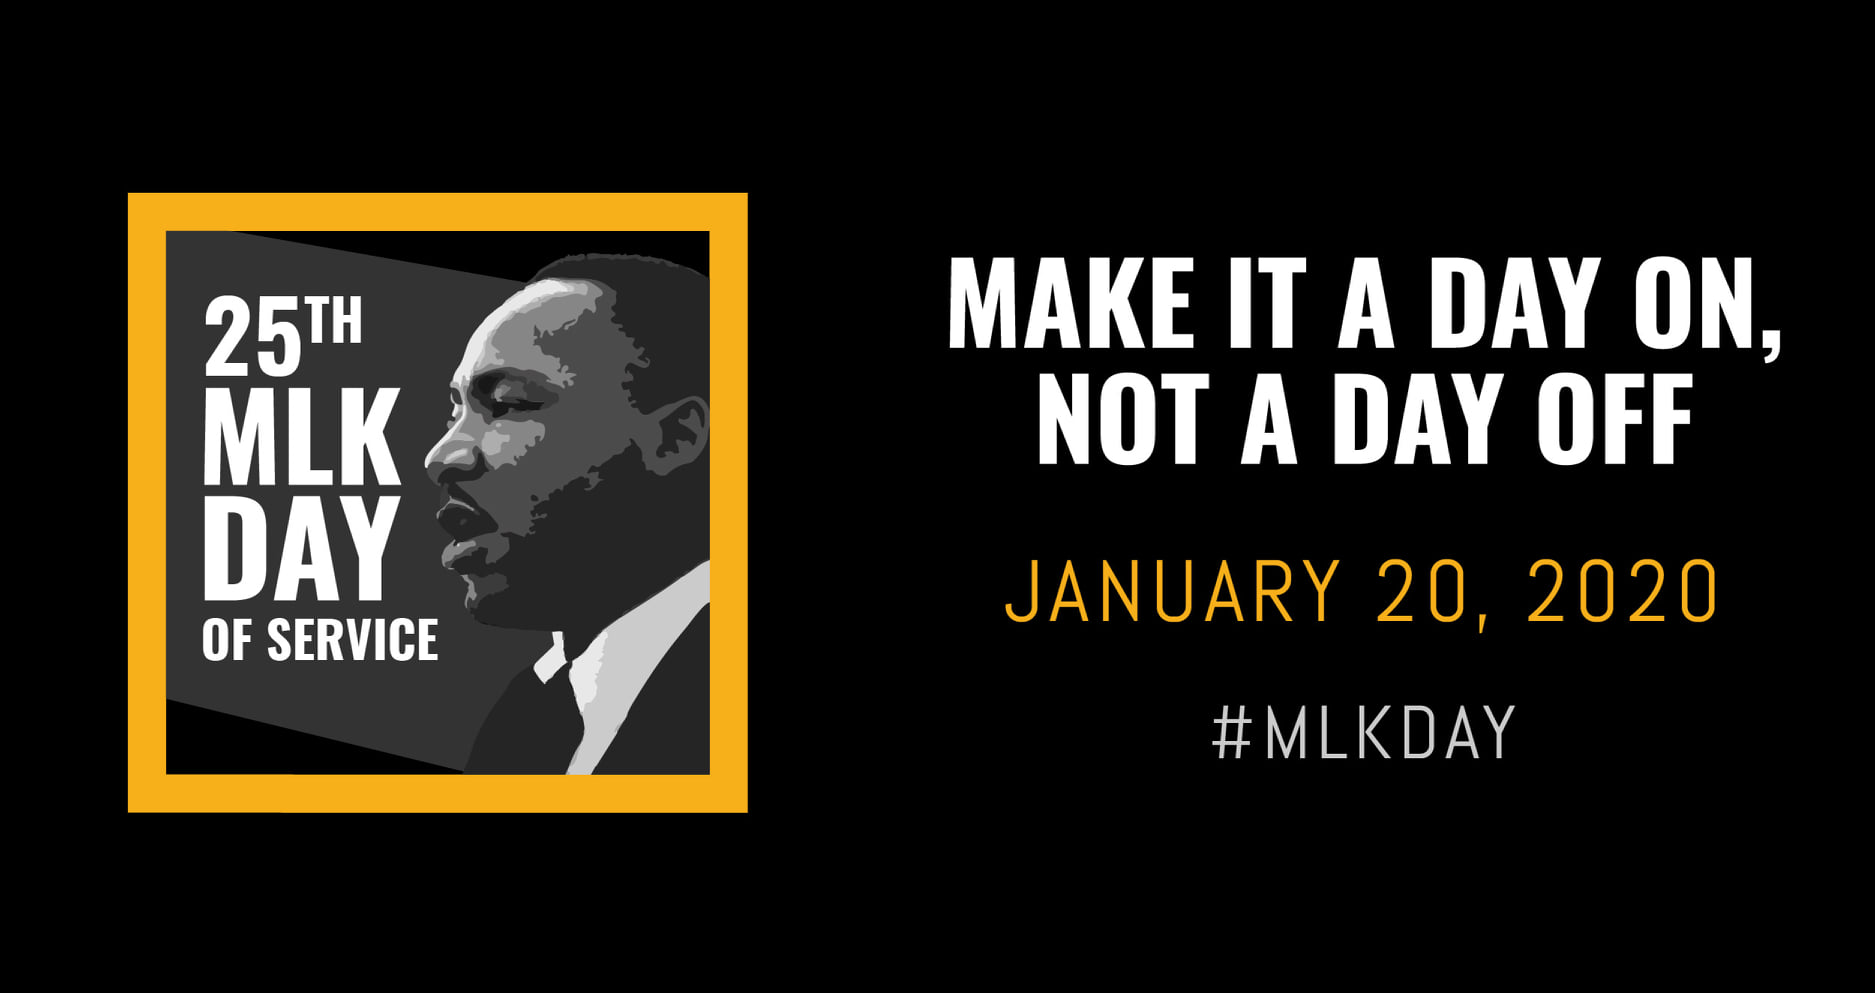 National Day of Service – Martin Luther King, Jr. Day